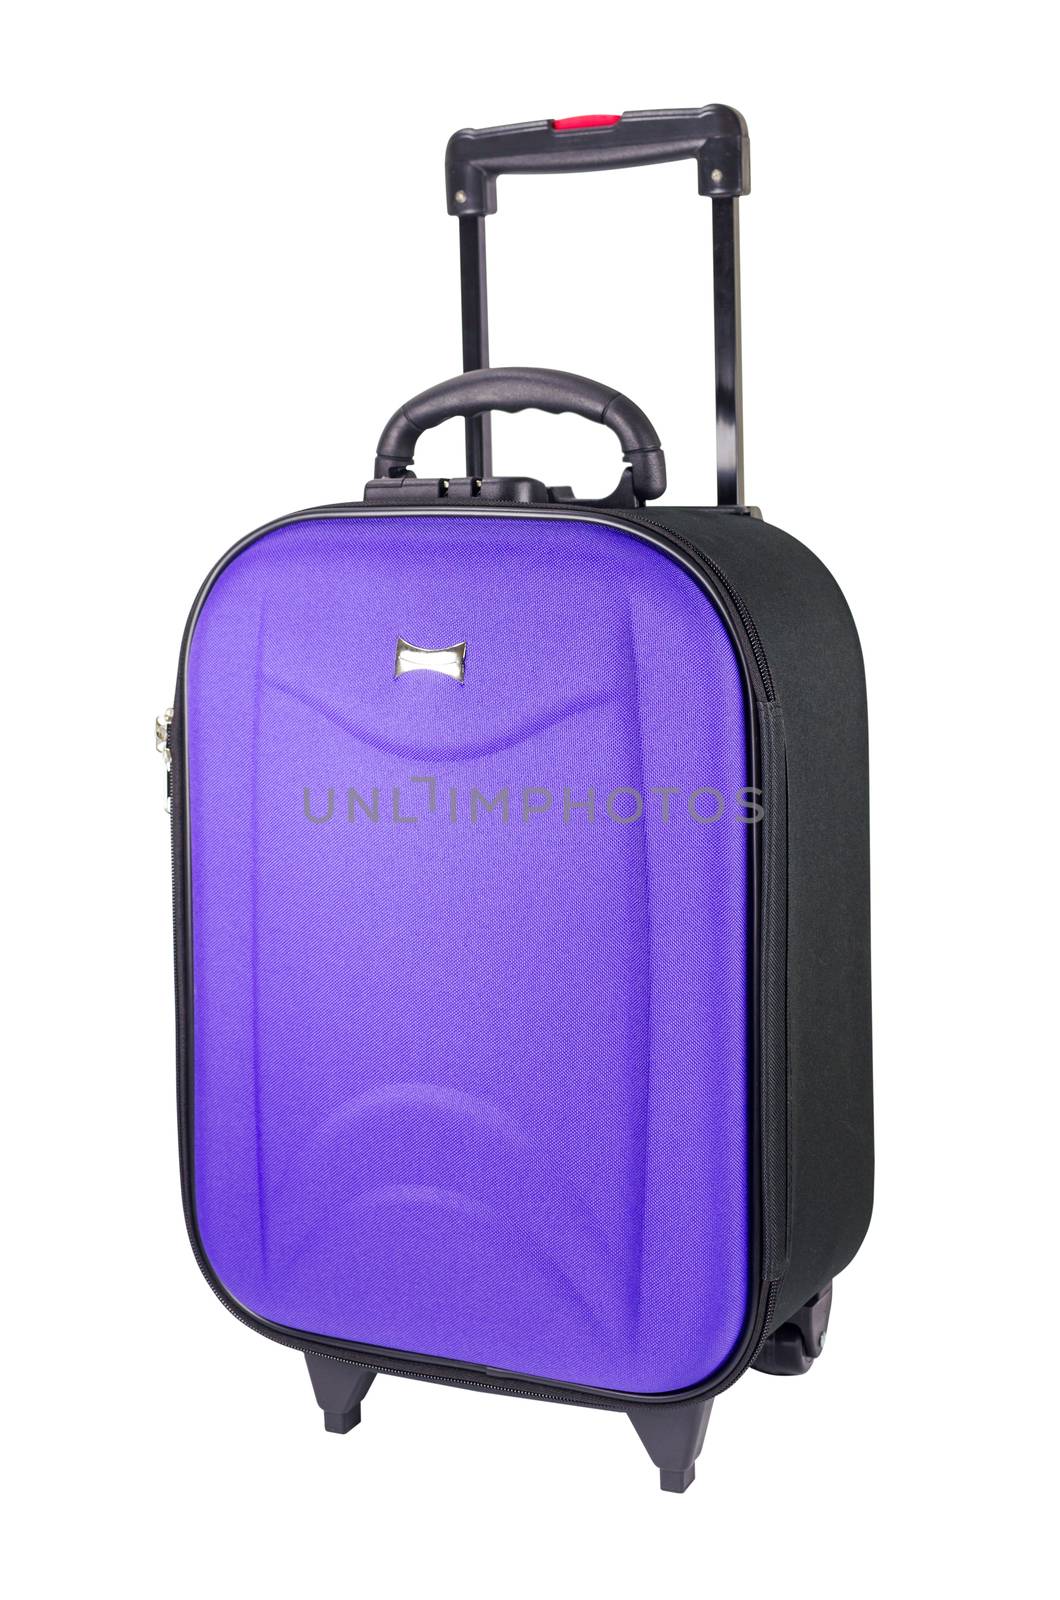 Violet suitcase ,Travel luggage isolated on the white background by nop16